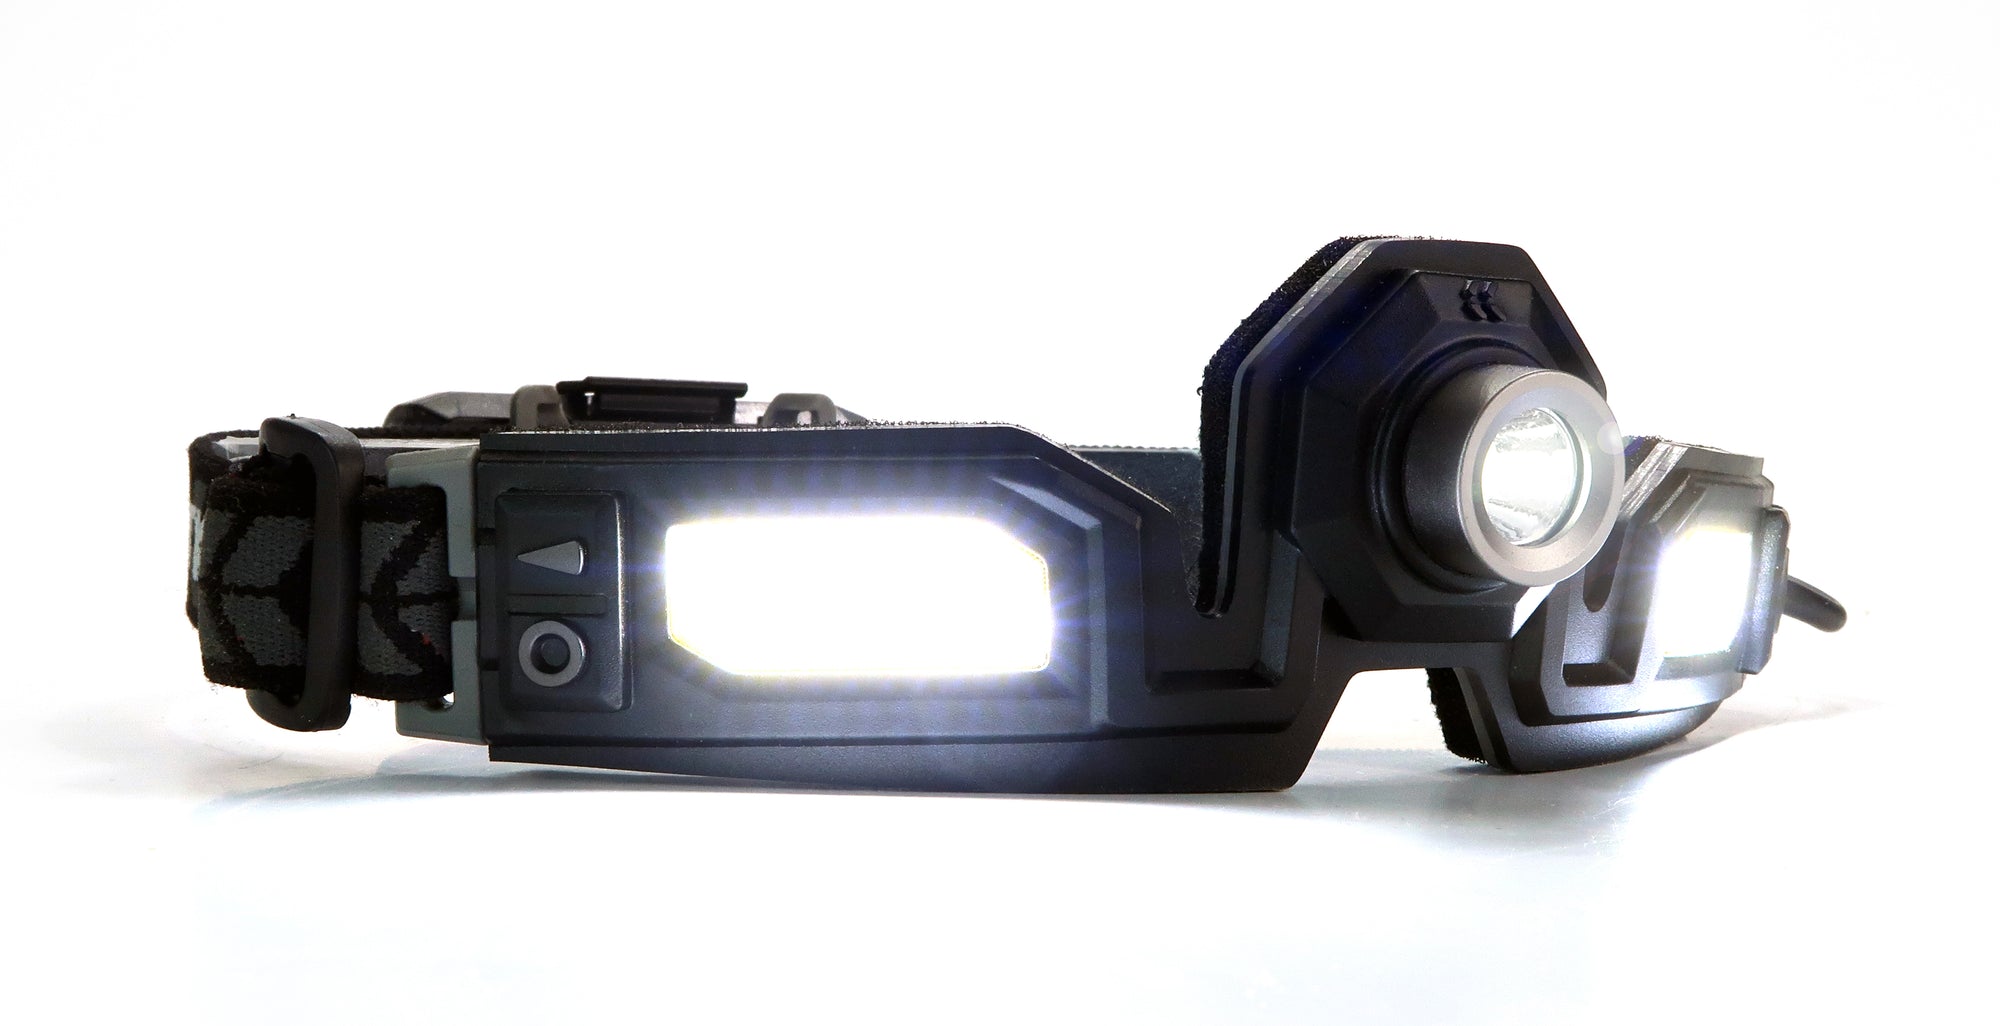 What To Look For When Buying A Head Torch?